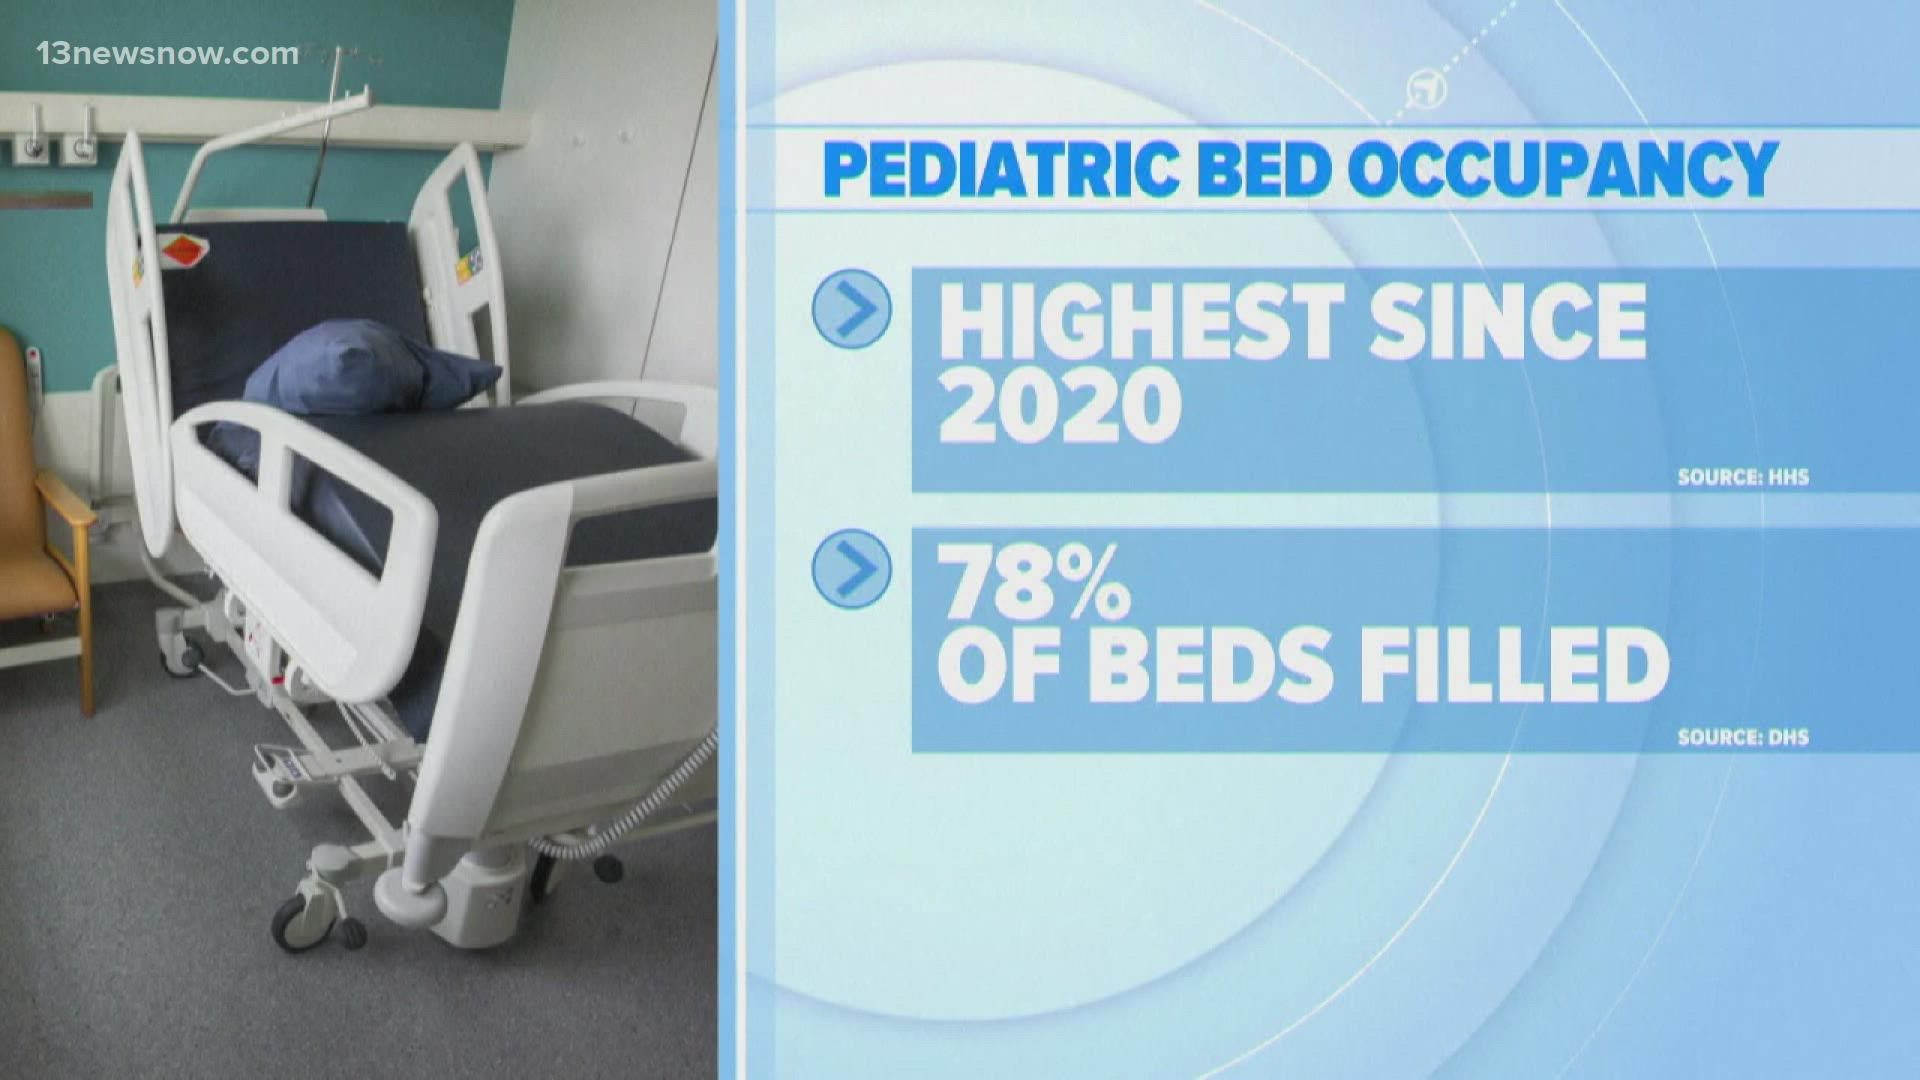 More than 75% of the nations pediatric beds are filled.